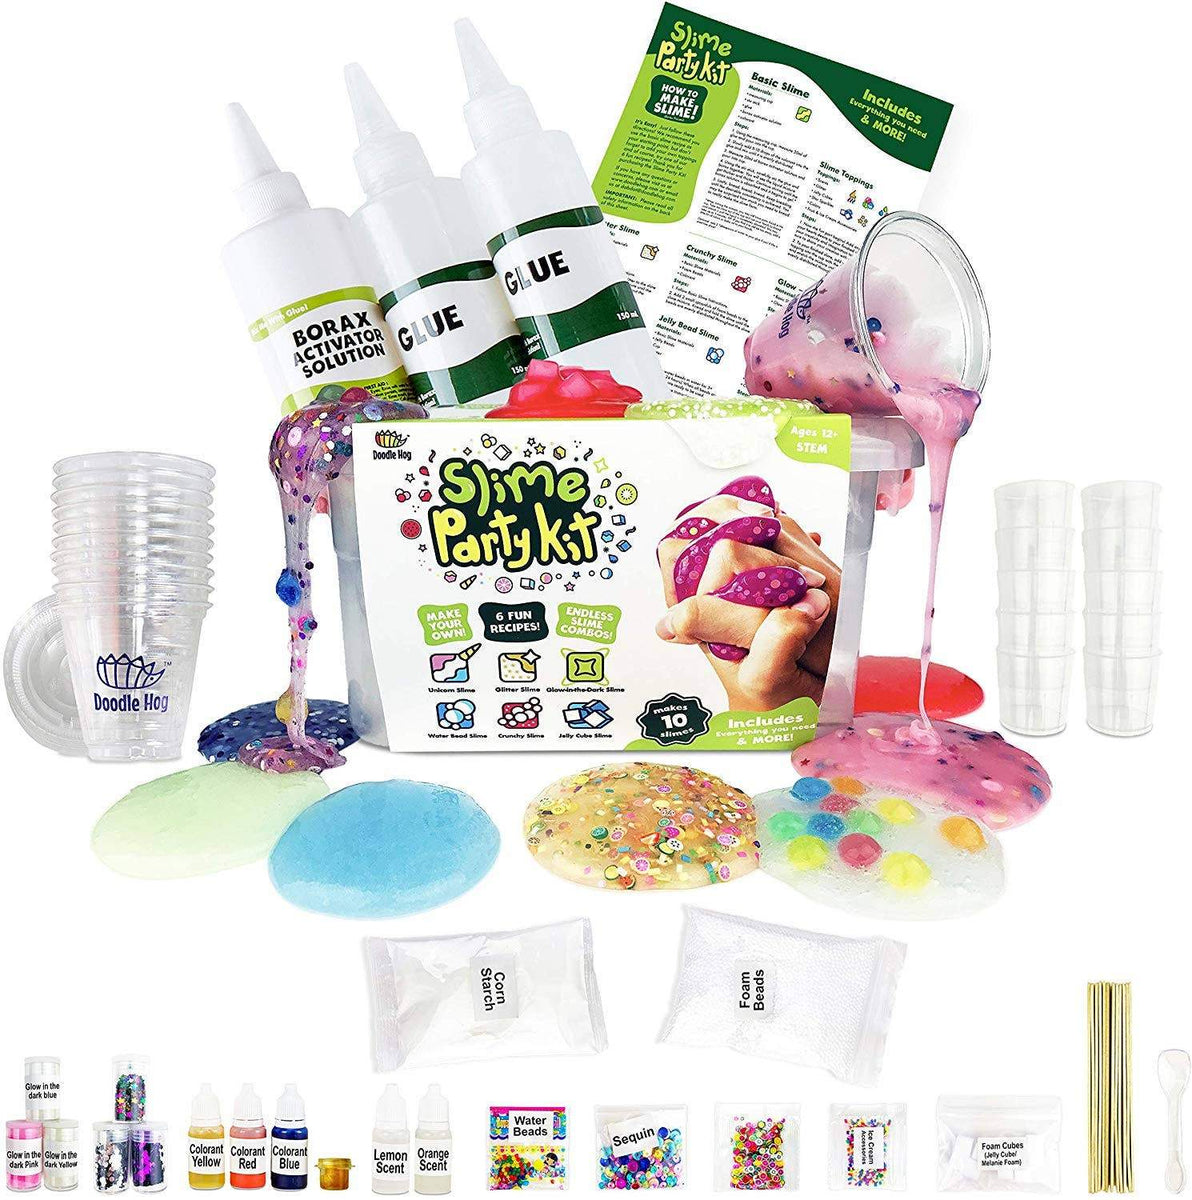 Crunchy Slime Beads, Slime Additives Supplies